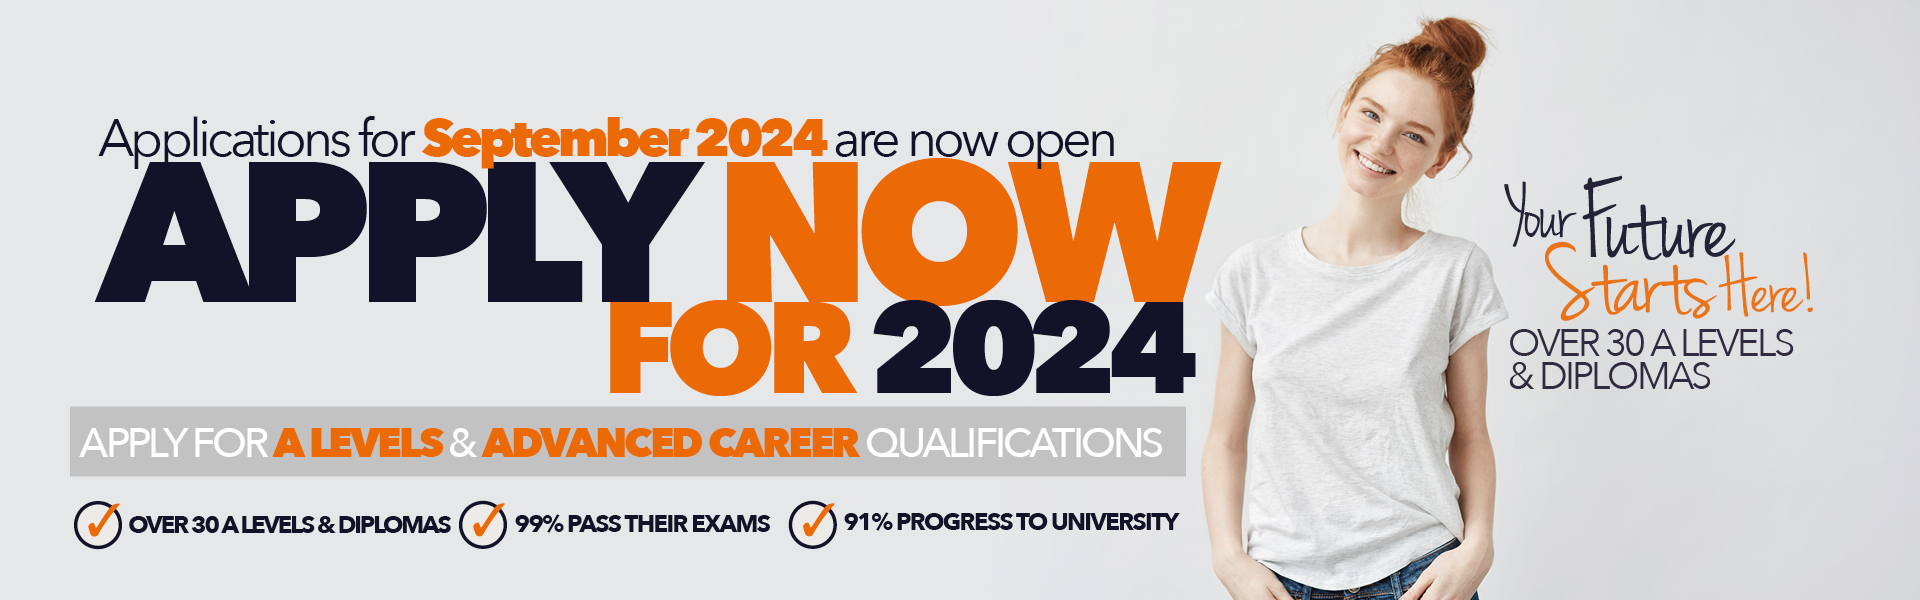 Apply now for 2024